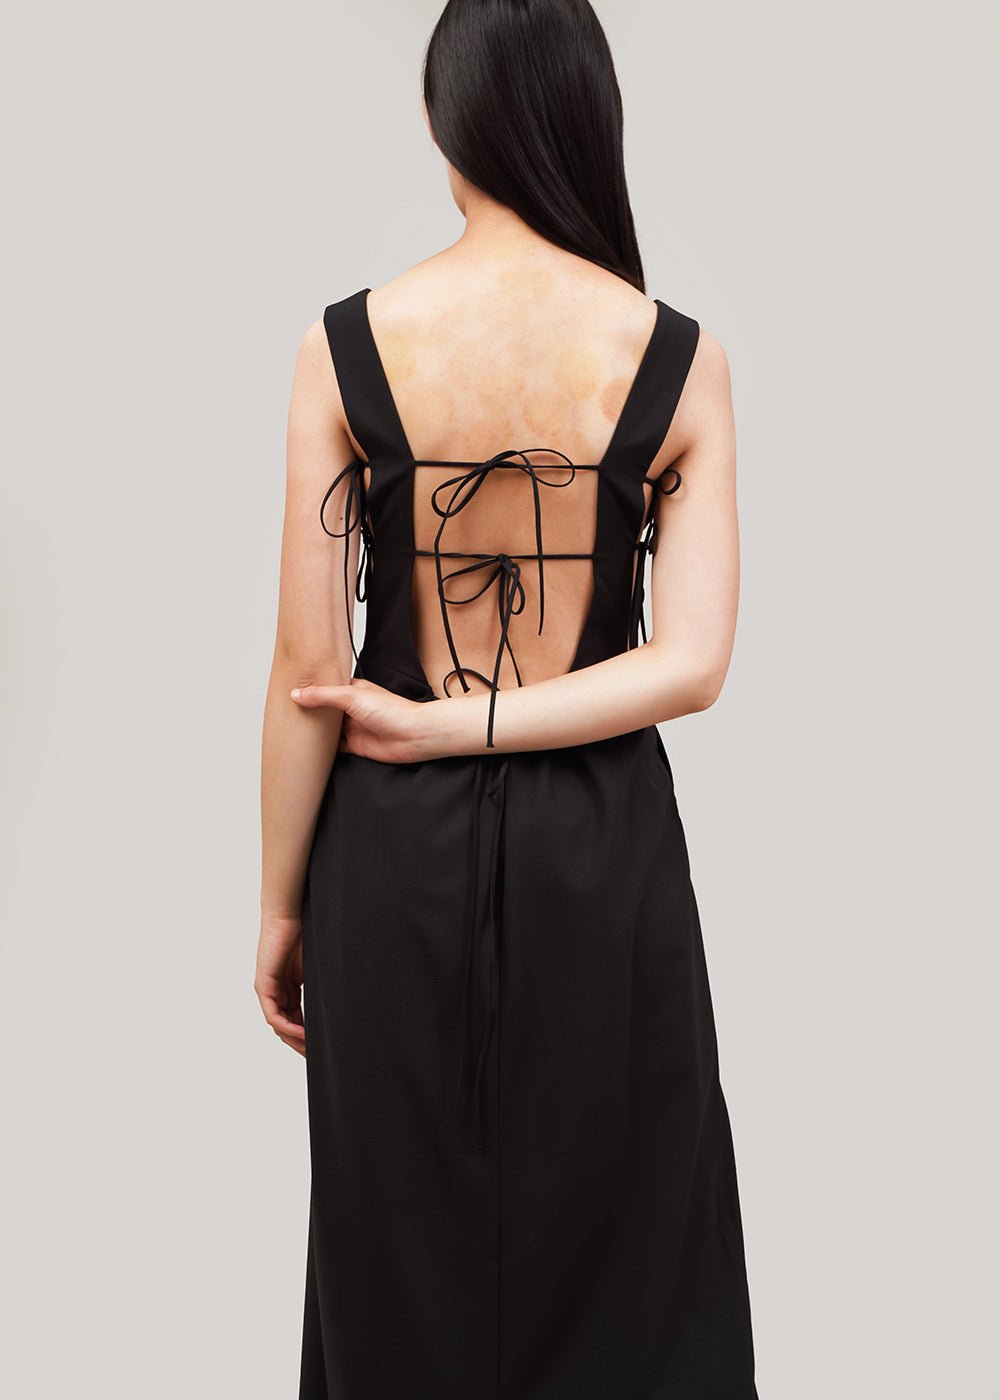 Cordera Tailored Cut-Out Dress - New Classics Studios Sustainable Ethical Fashion Canada